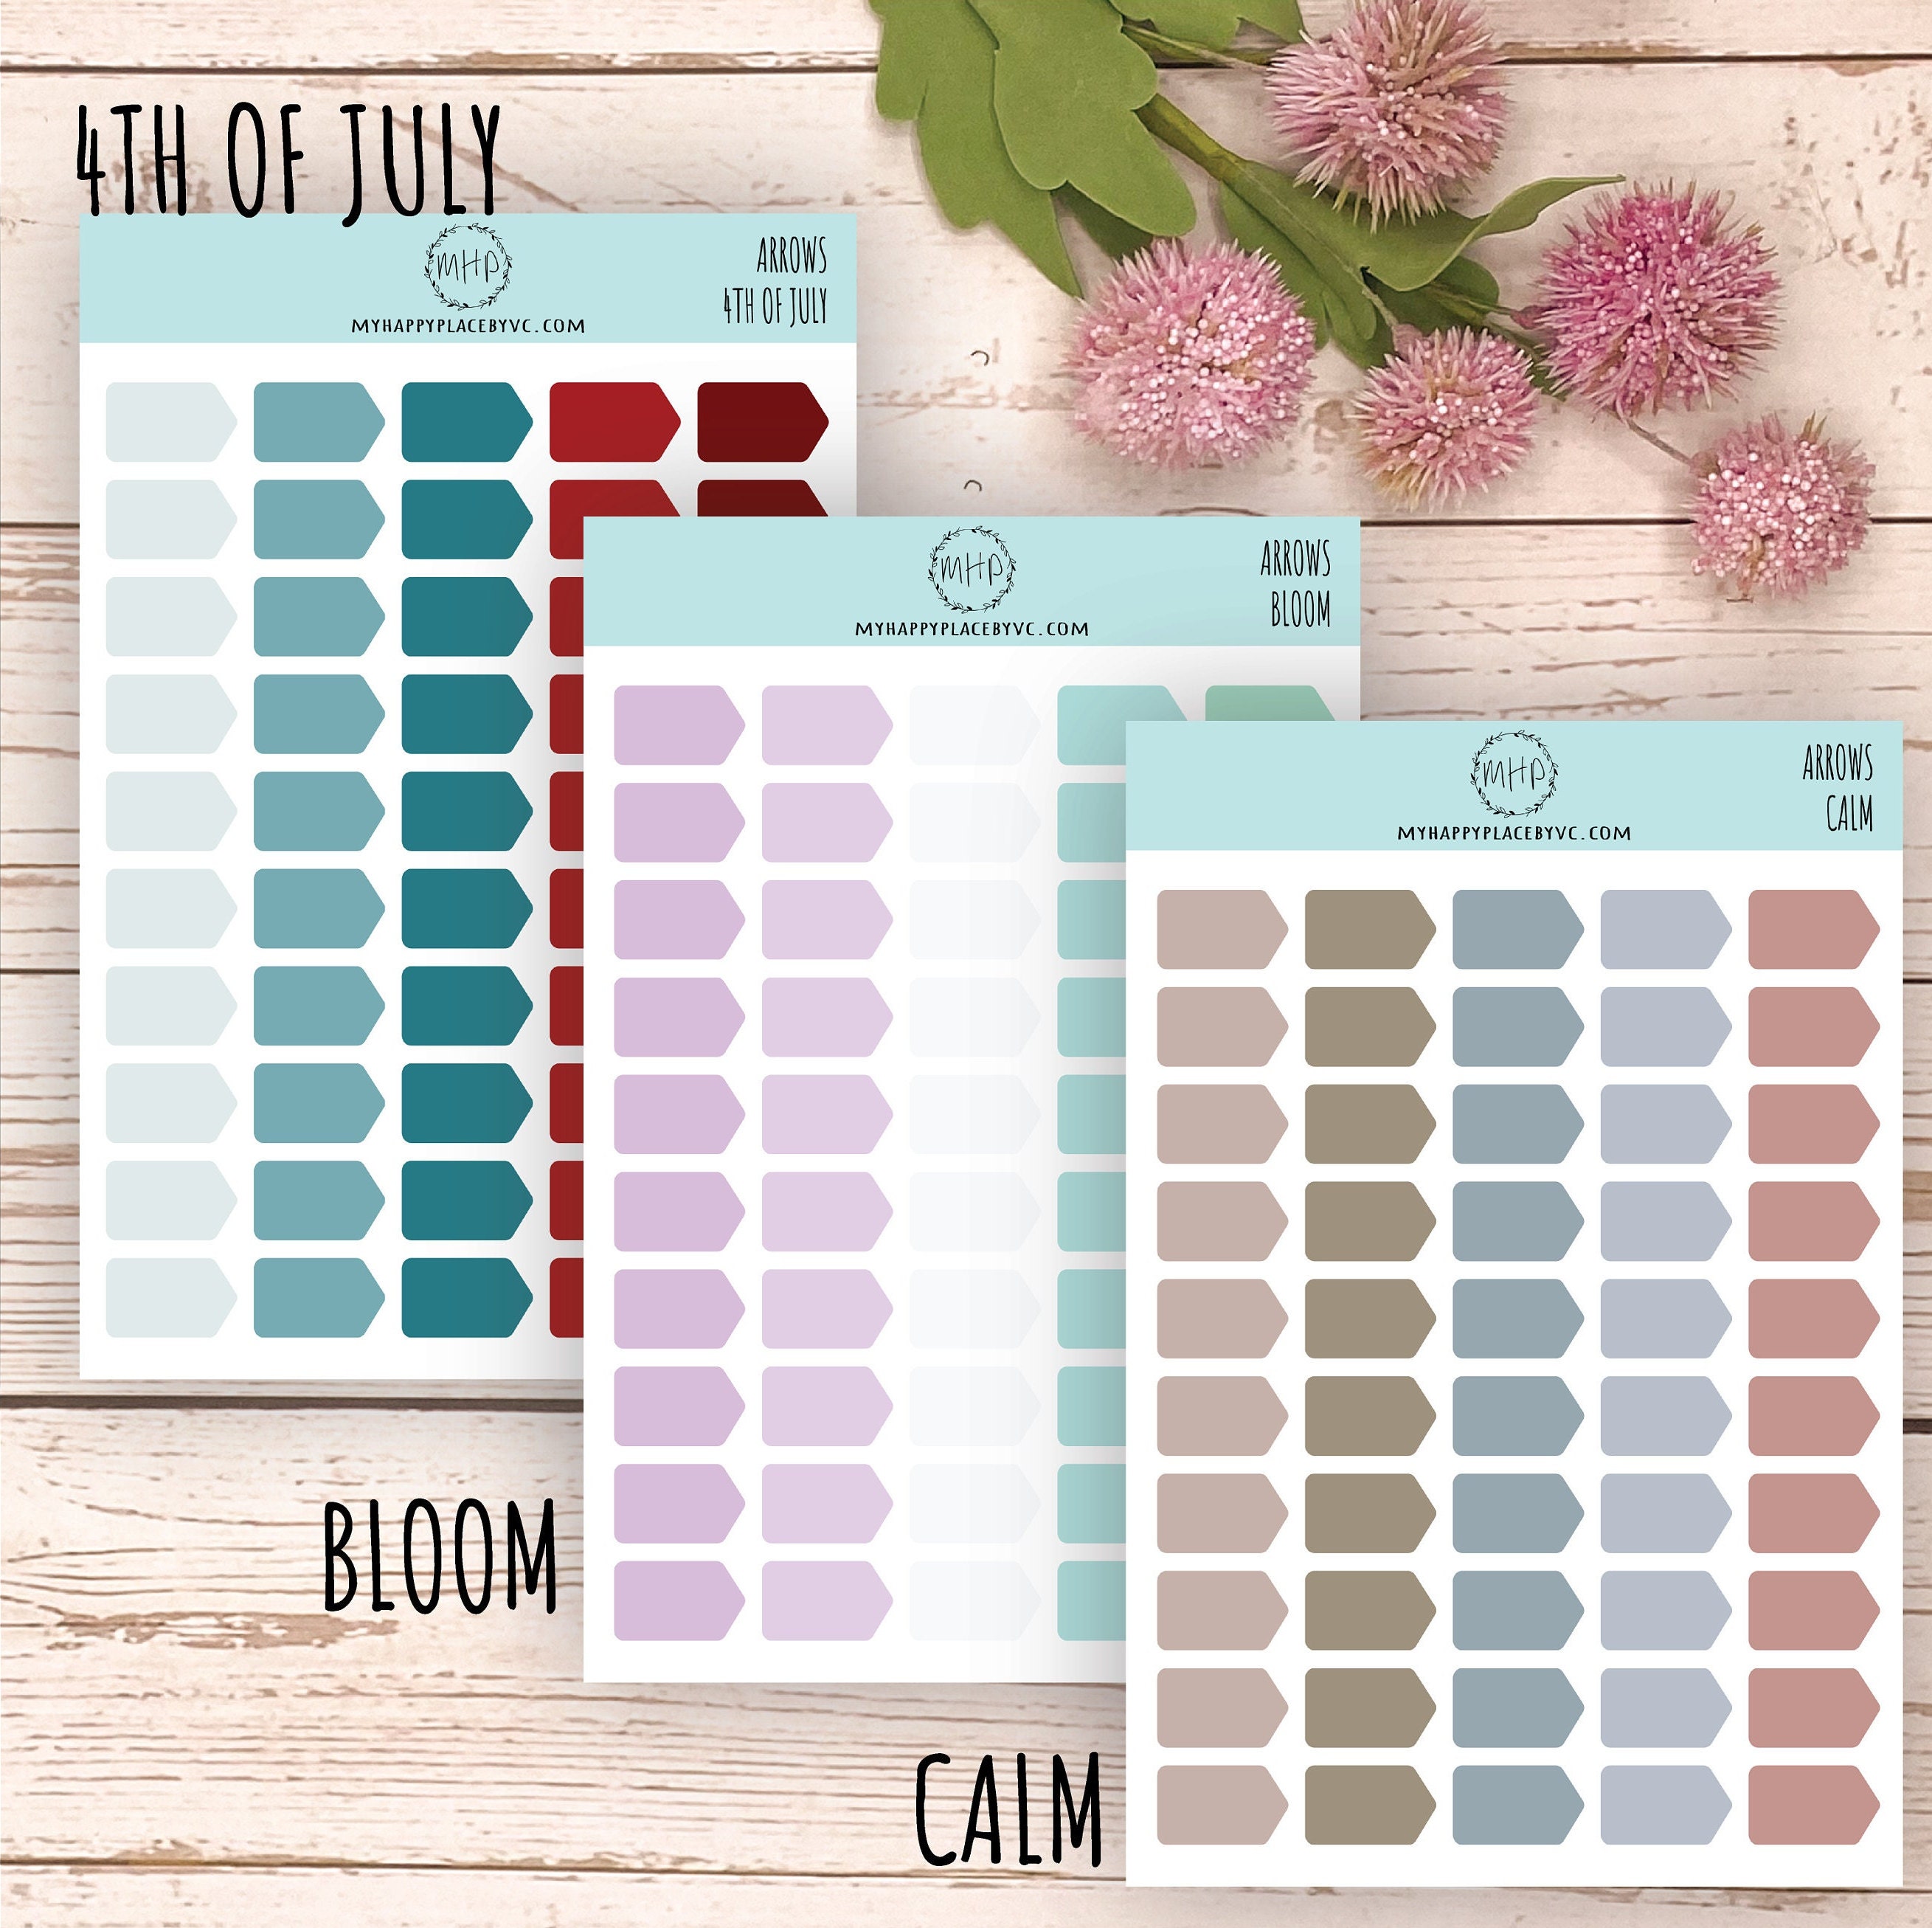 Small Arrow Planner Stickers. Stickers for Planners, Bullet Journals and  Organizers. Bullet Point Stickers || H556